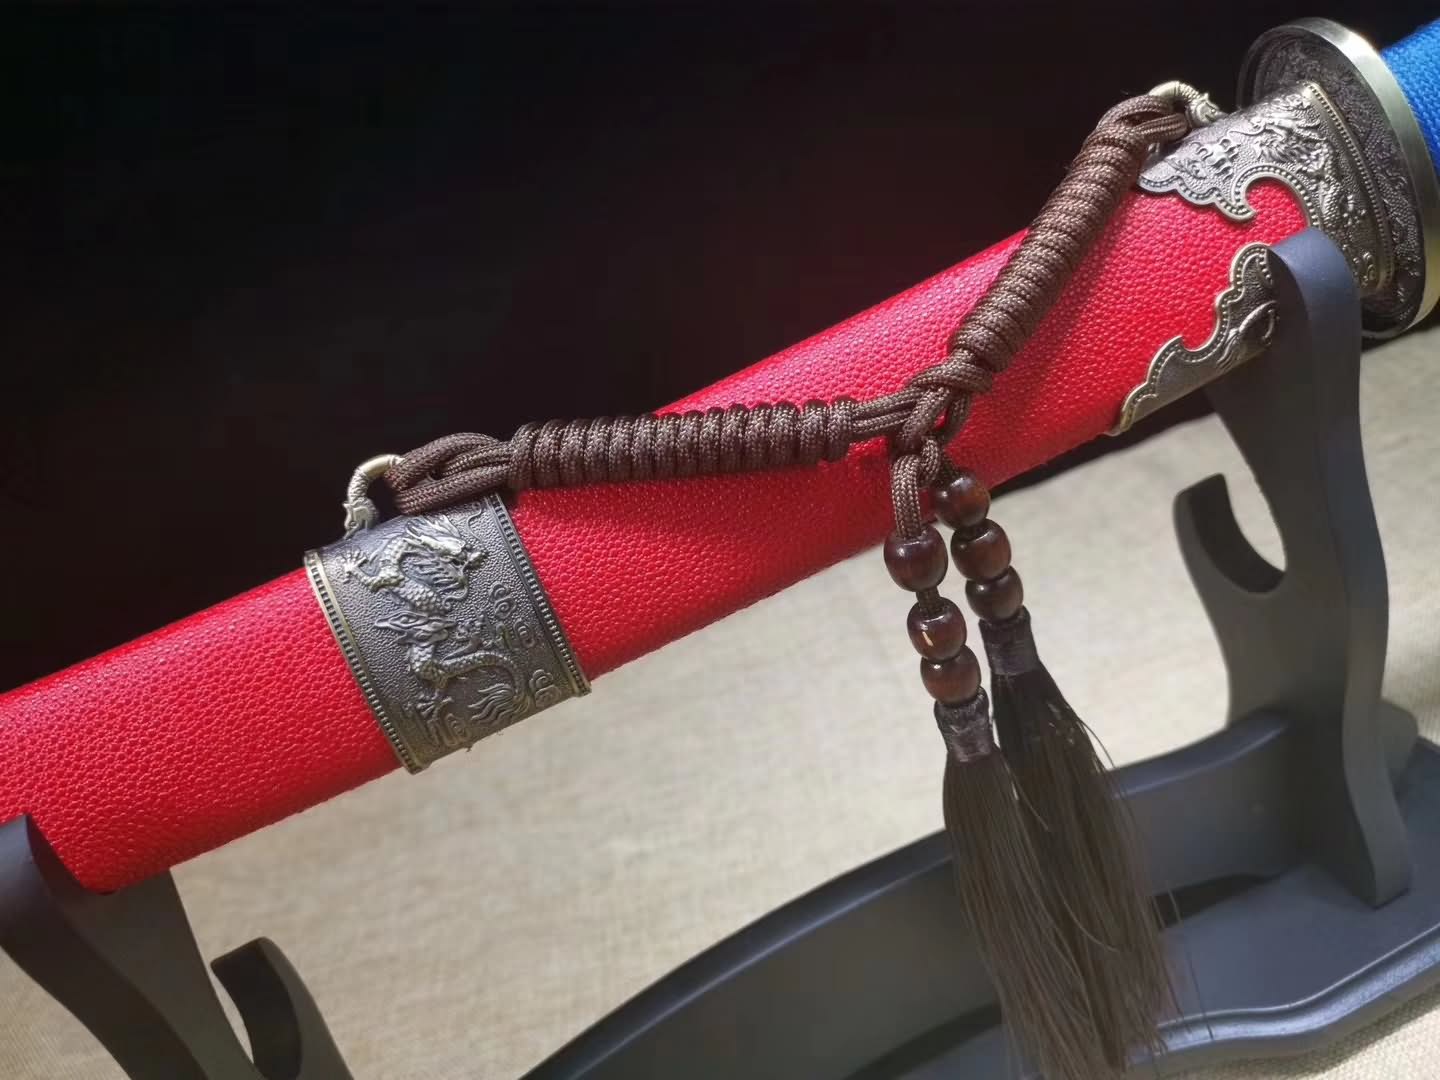 Qing dao sword,High carbon steel blade,Red scabbard,Alloy fittings - Chinese sword shop